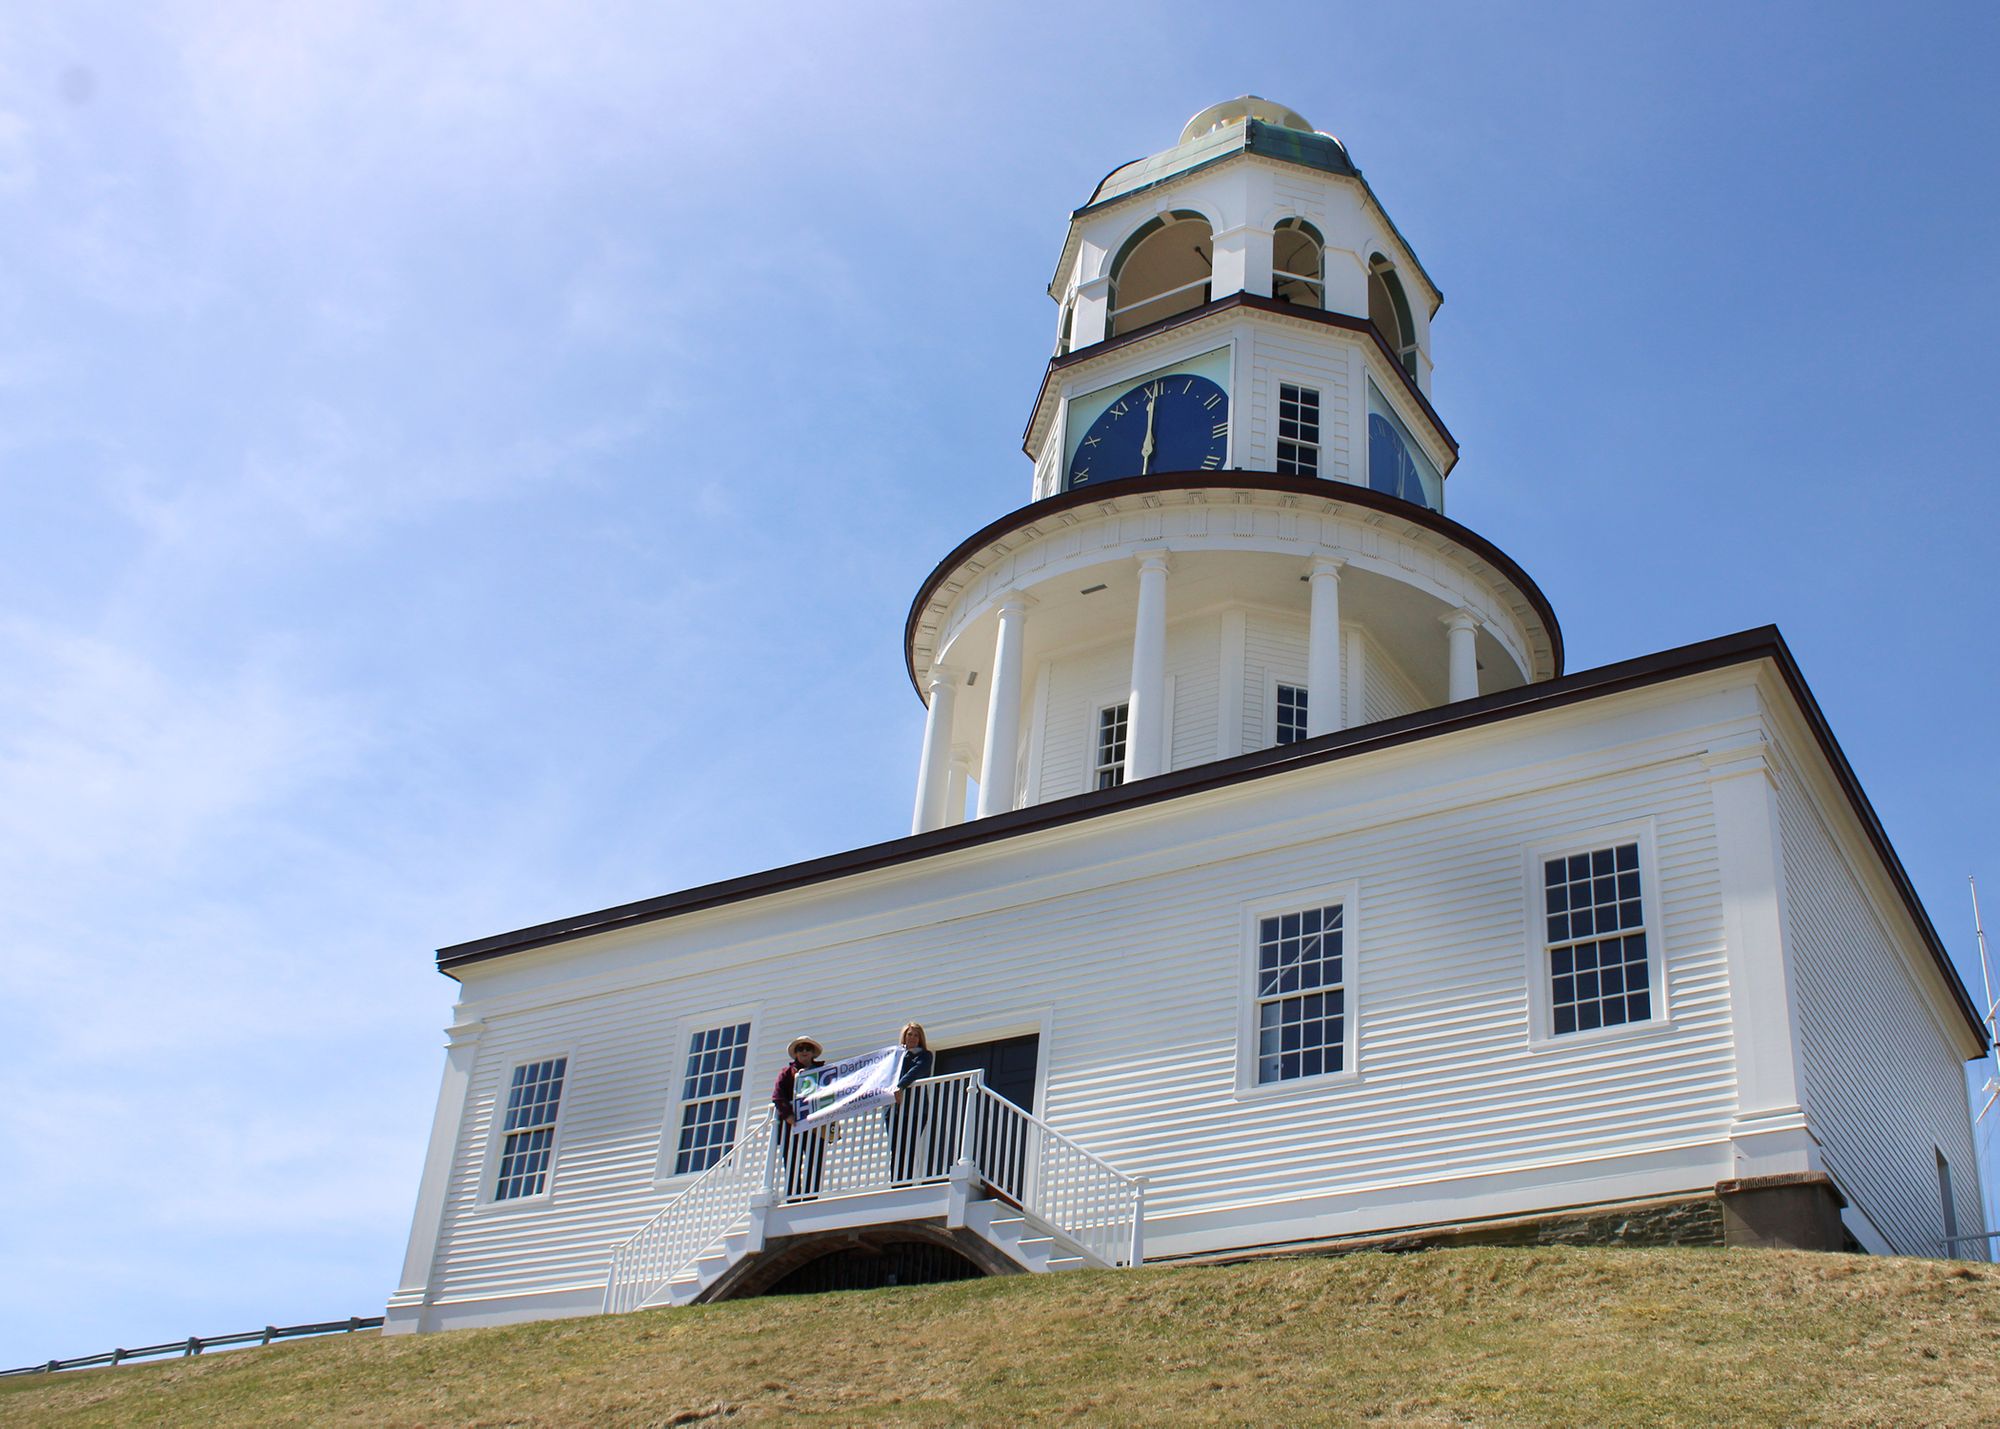 Image of clock tower on Citadel Hill against blue sky